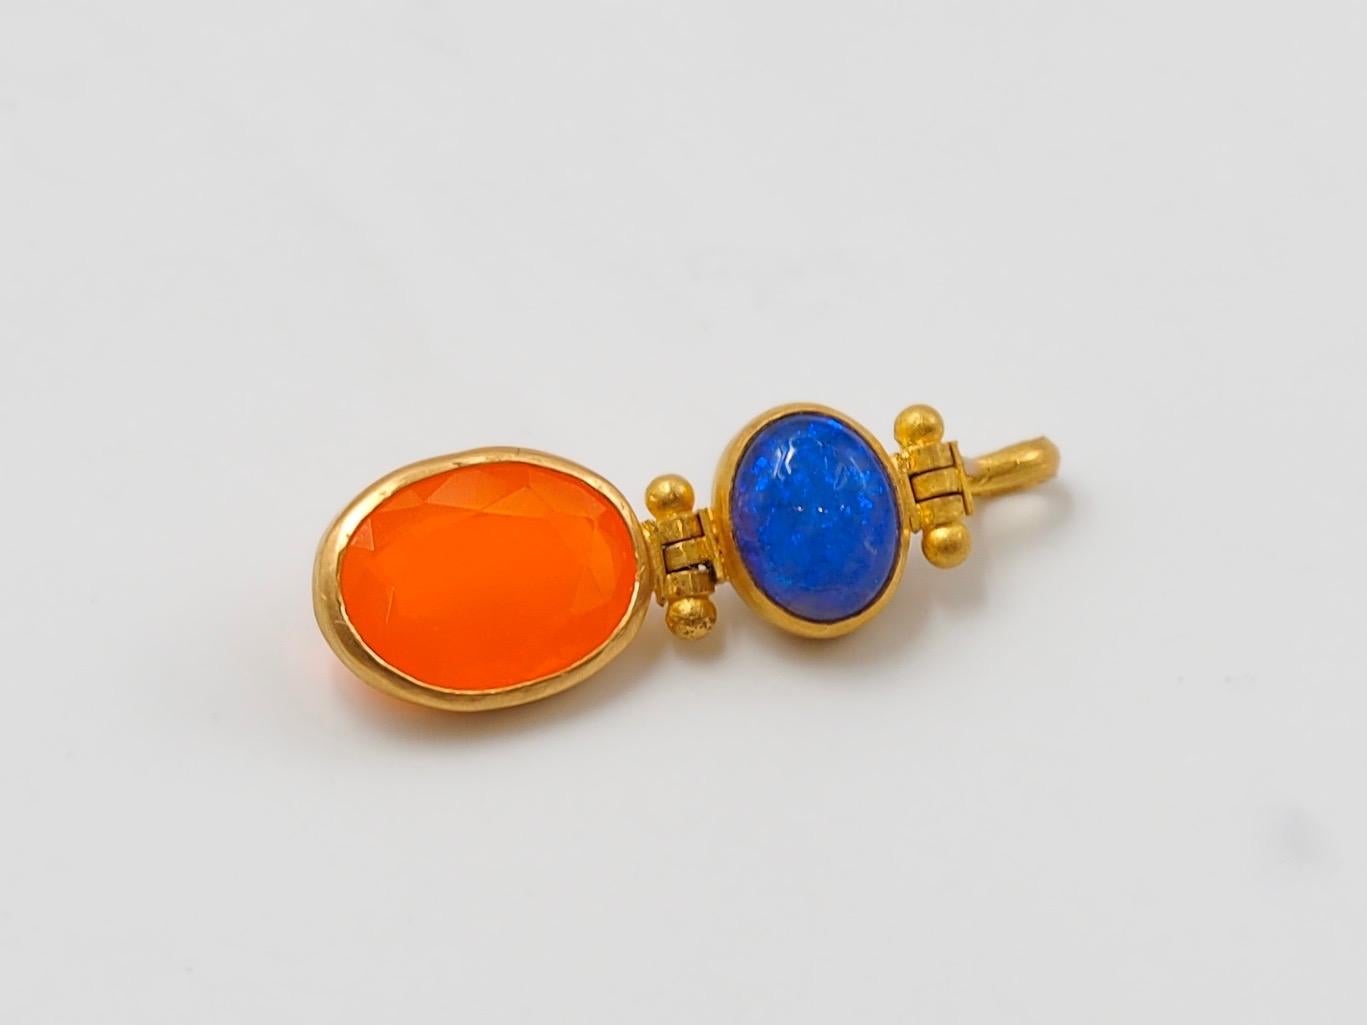 This pendant is composed of a blue opal (doublet) of 1.31 cts and a fire opal of 1.82 cts. Opal is a fragile stone that should be worn with attention.
Between the stones and at the top part, the pendant has 2 swivels mechanisms to allow good